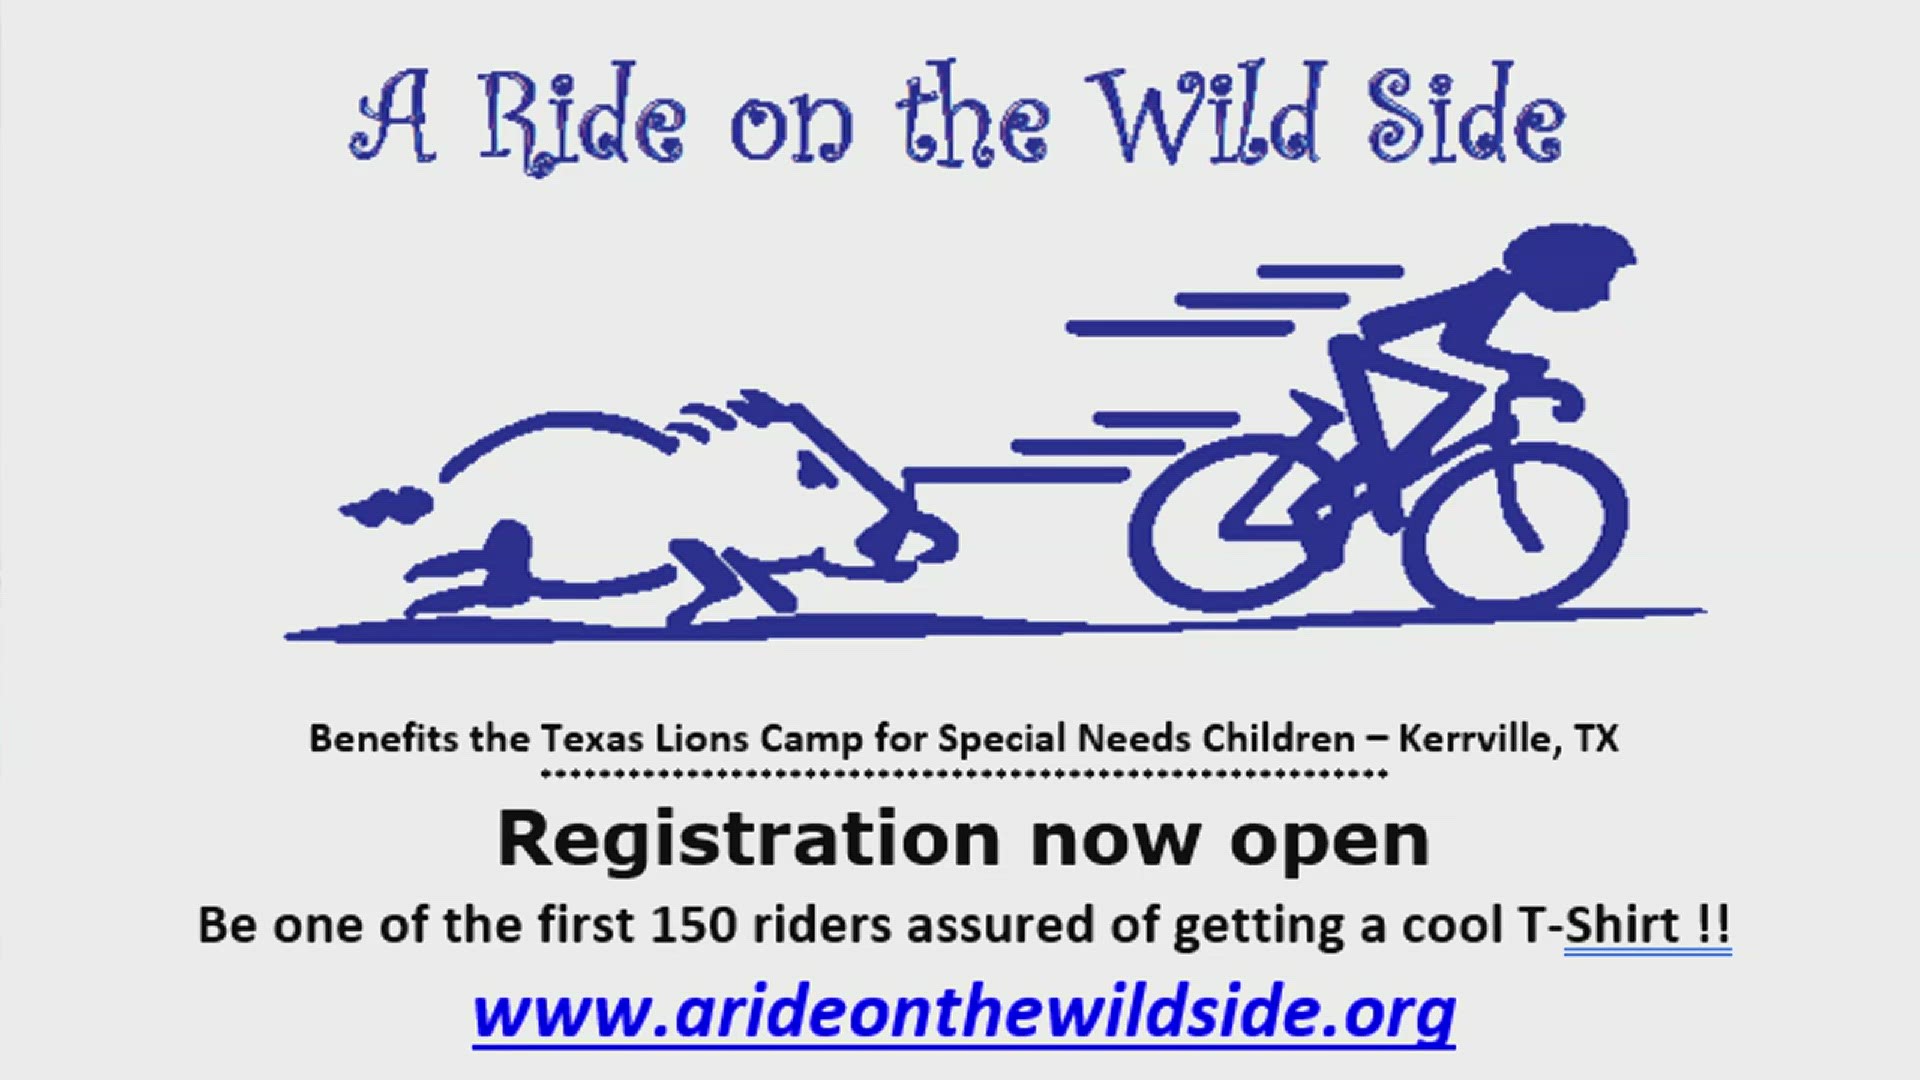 The Kingsville Noon Lions Club joined us live to invite the public to their 'A Ride on the Wild Side' charity bike tour at King Ranch.